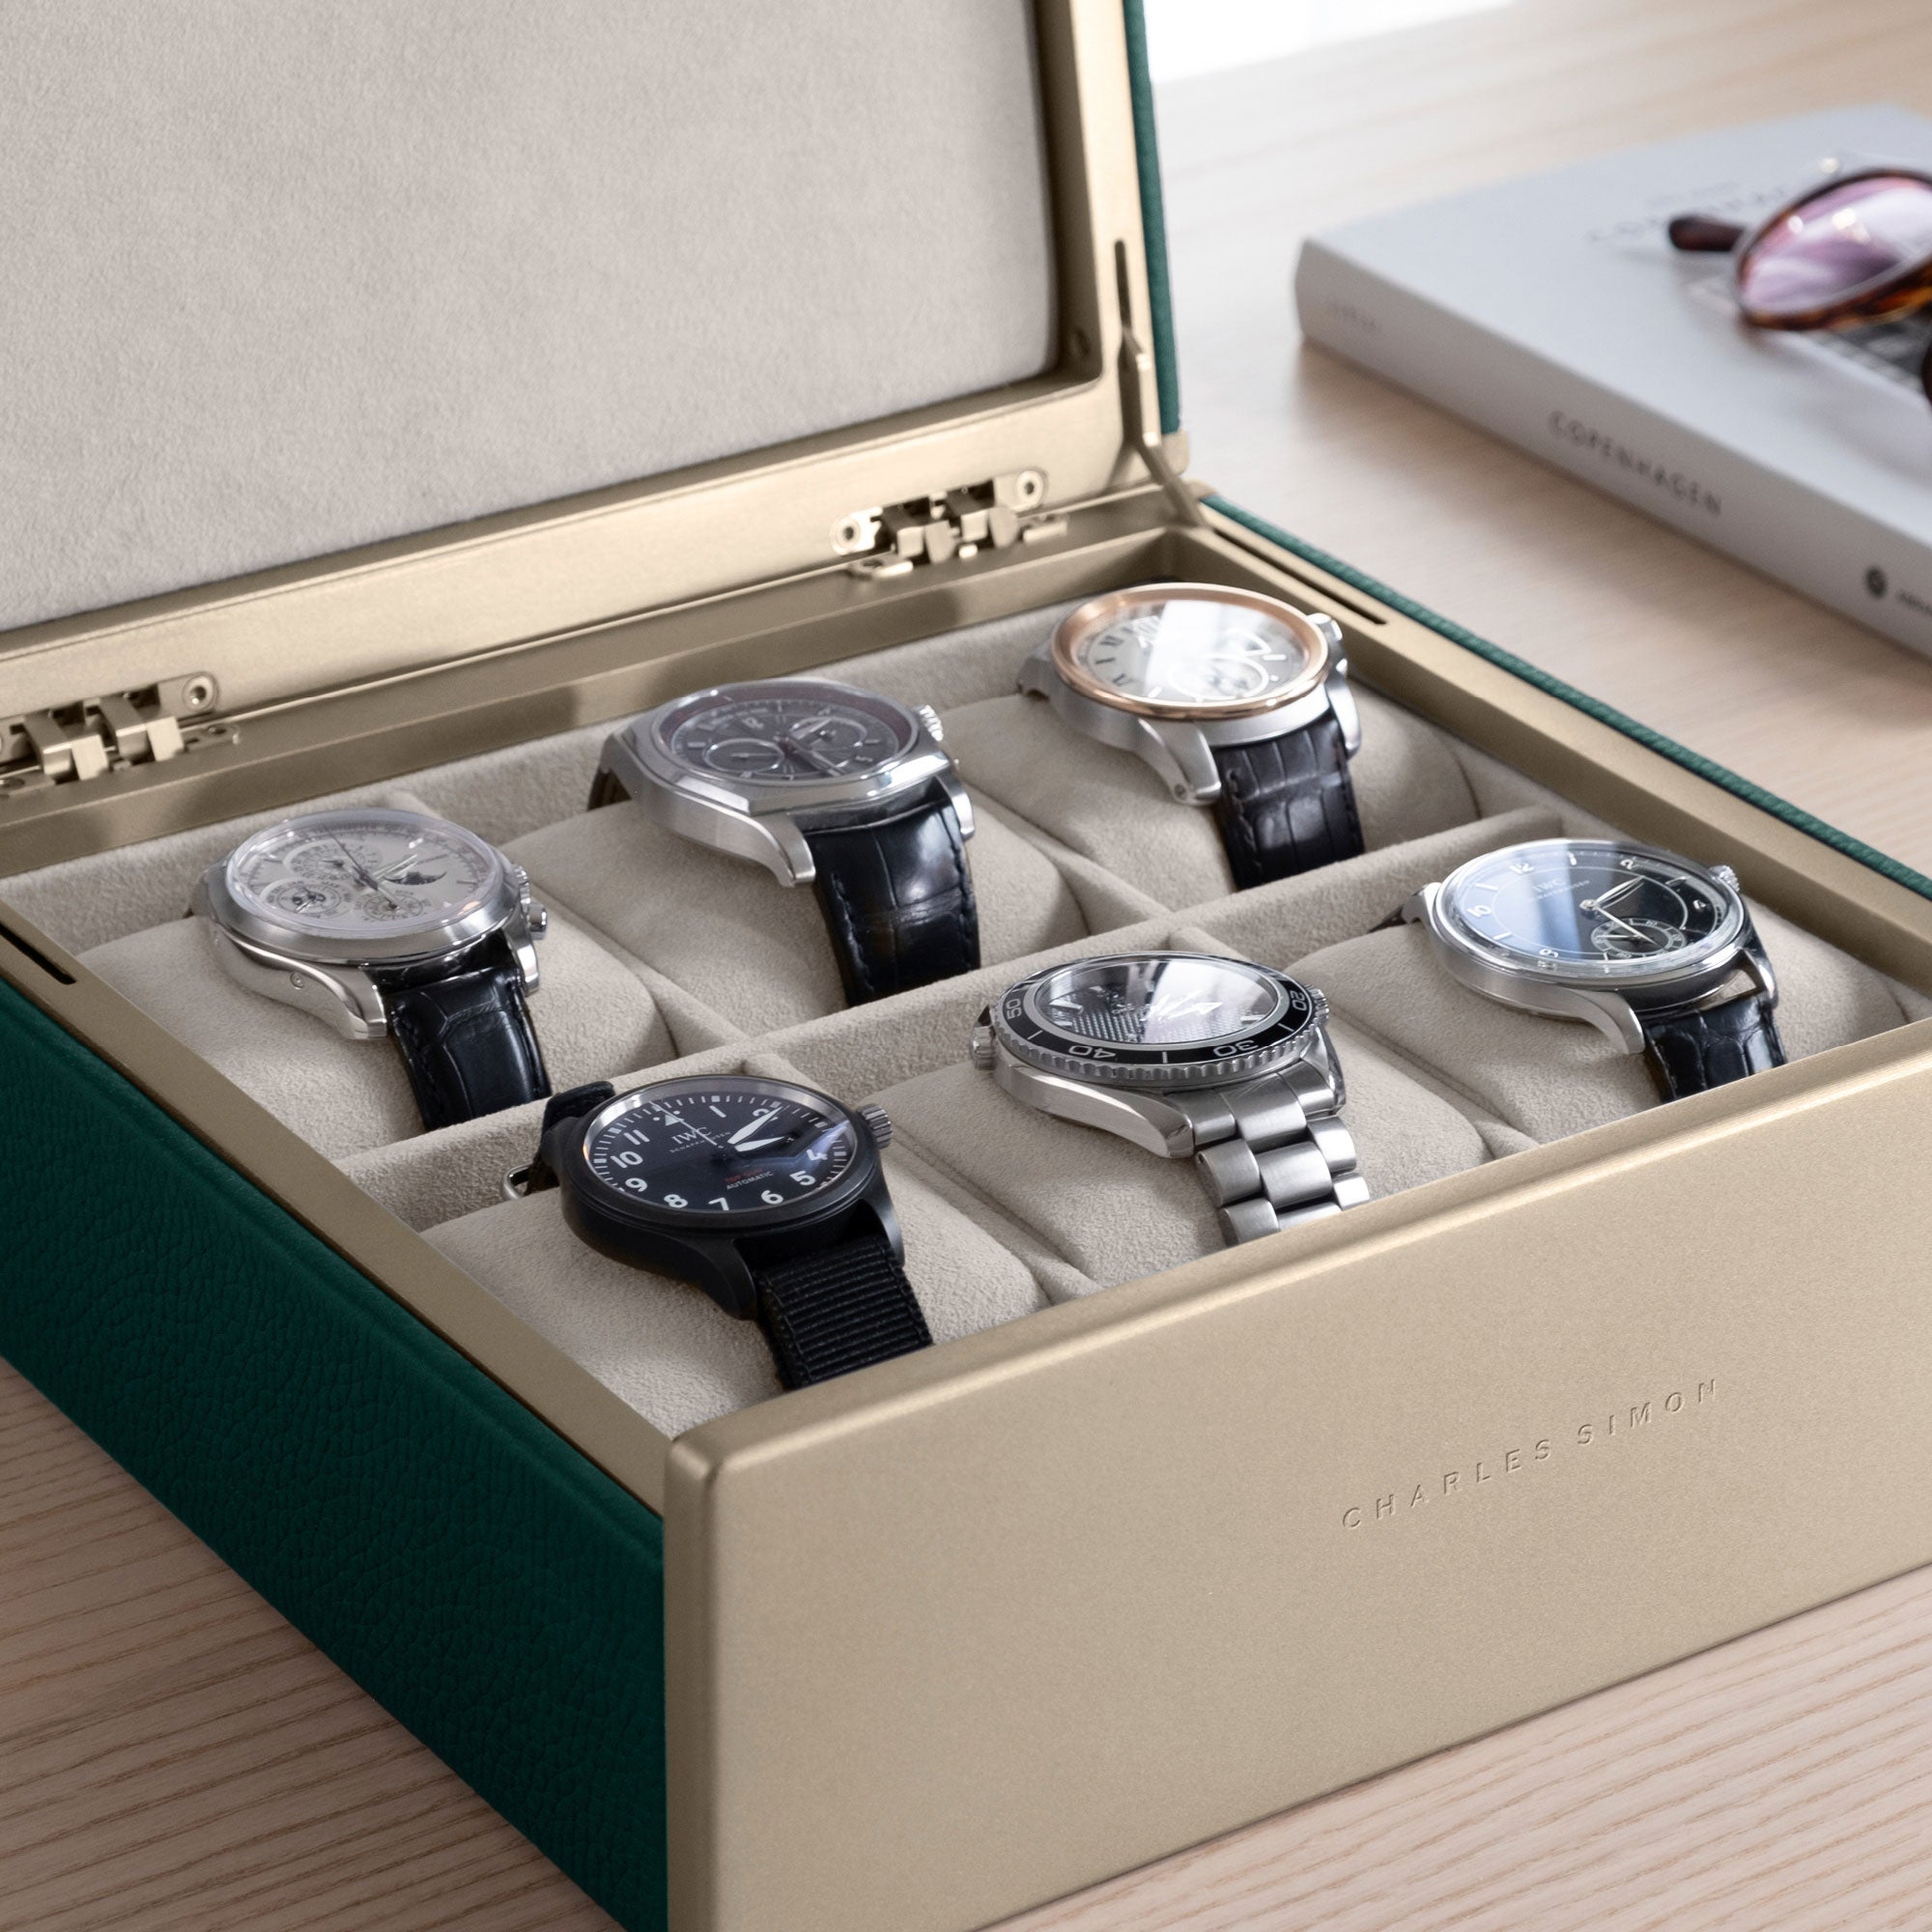 Detail photo of watch collection of 6 watches displayed in the gold Spence 6 watch box in emerald leather.